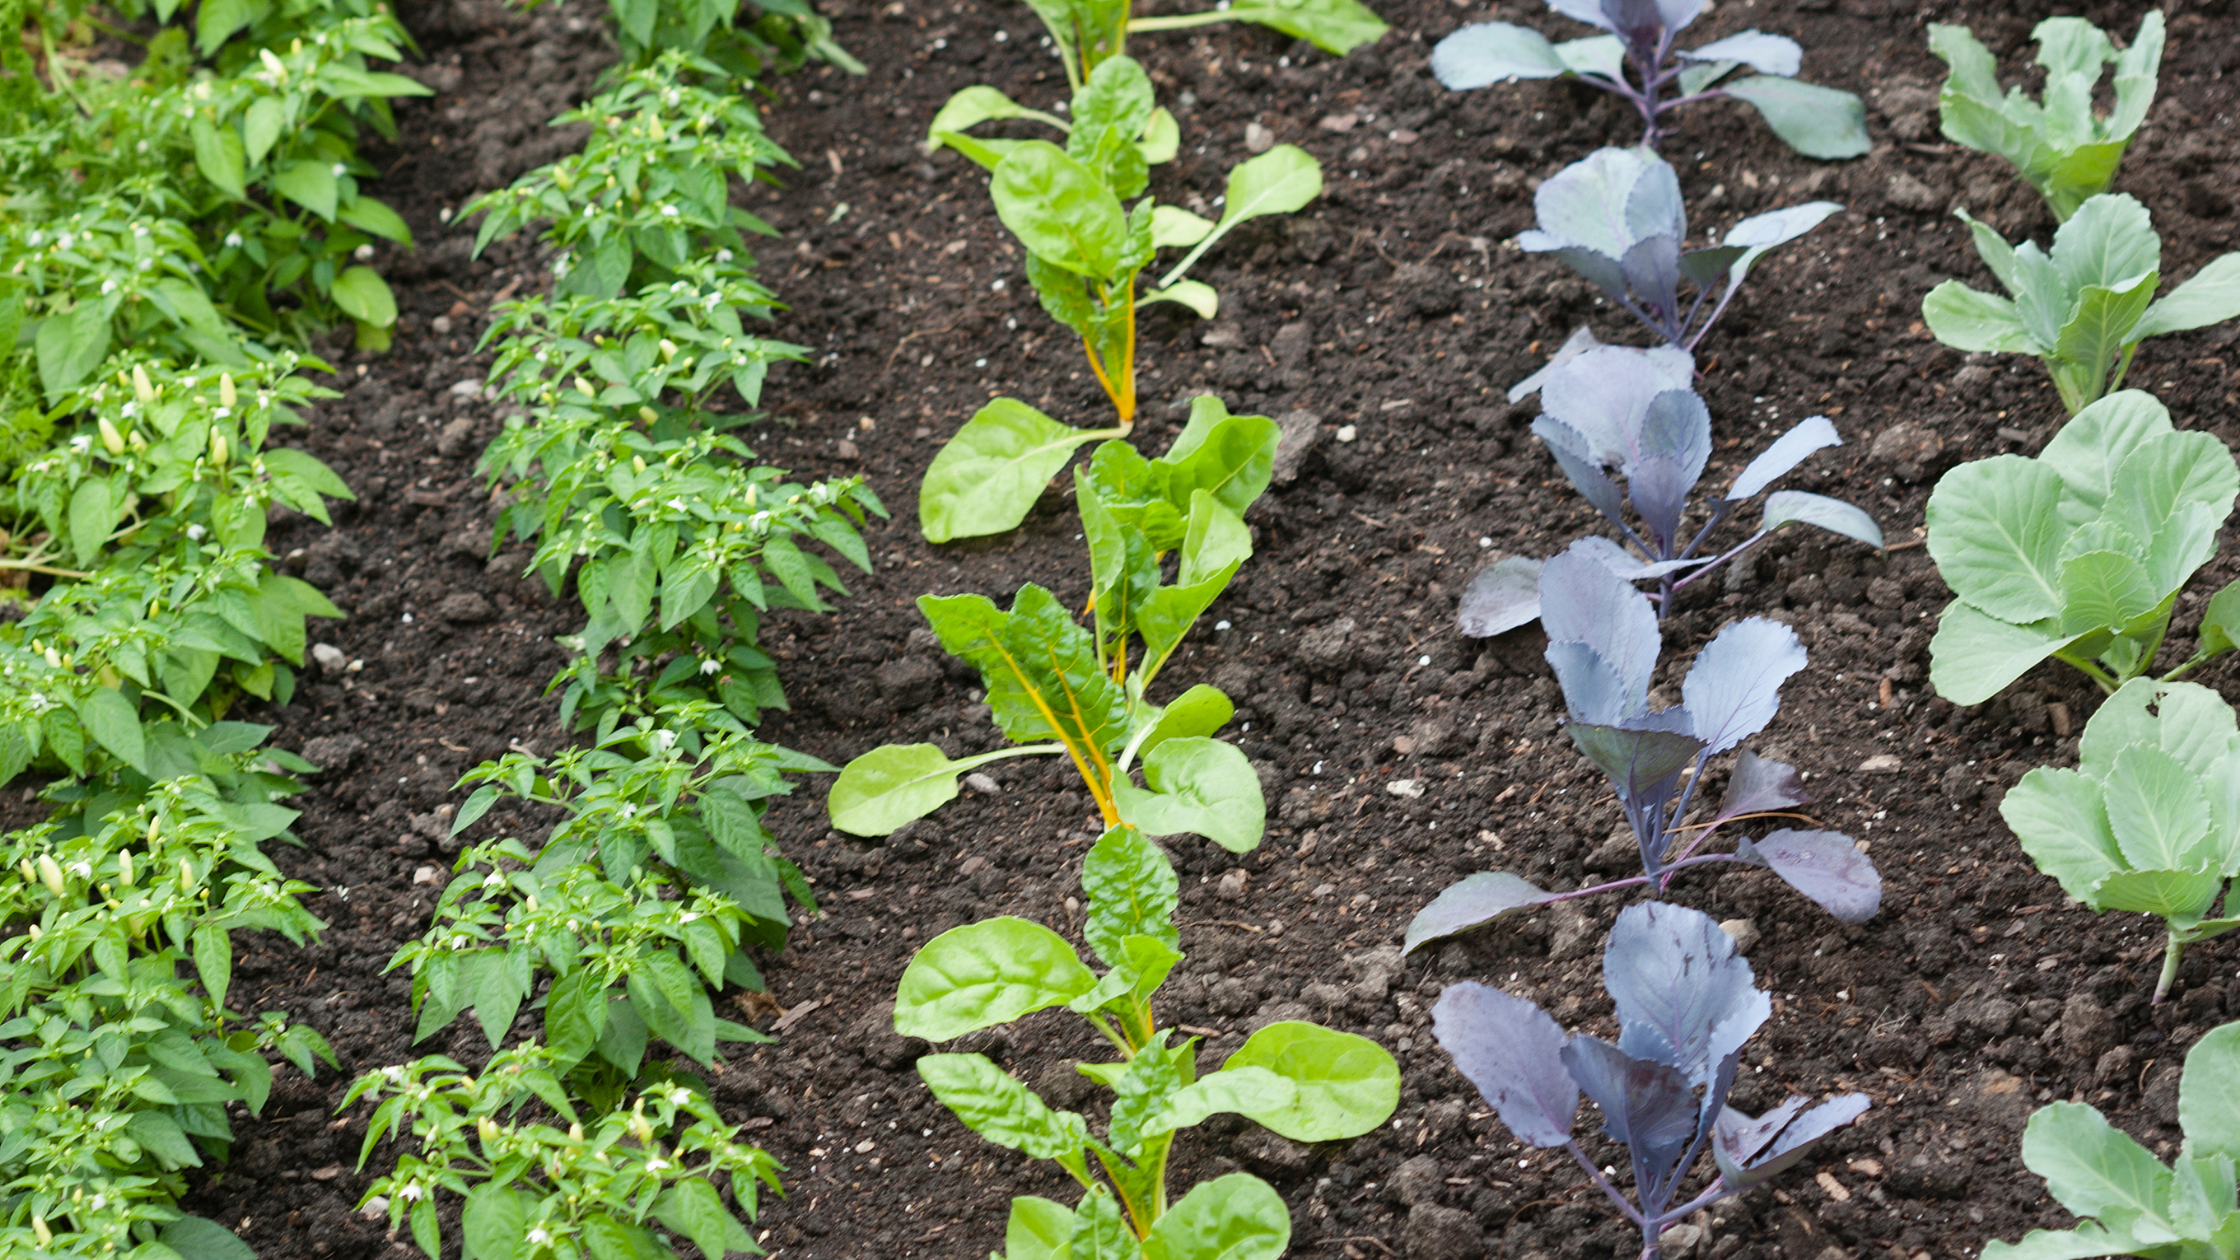 Looking for some garden planning tips? These vegetable garden ideas will help you understand how much space each plant needs to have a successful backyard veggie garden!